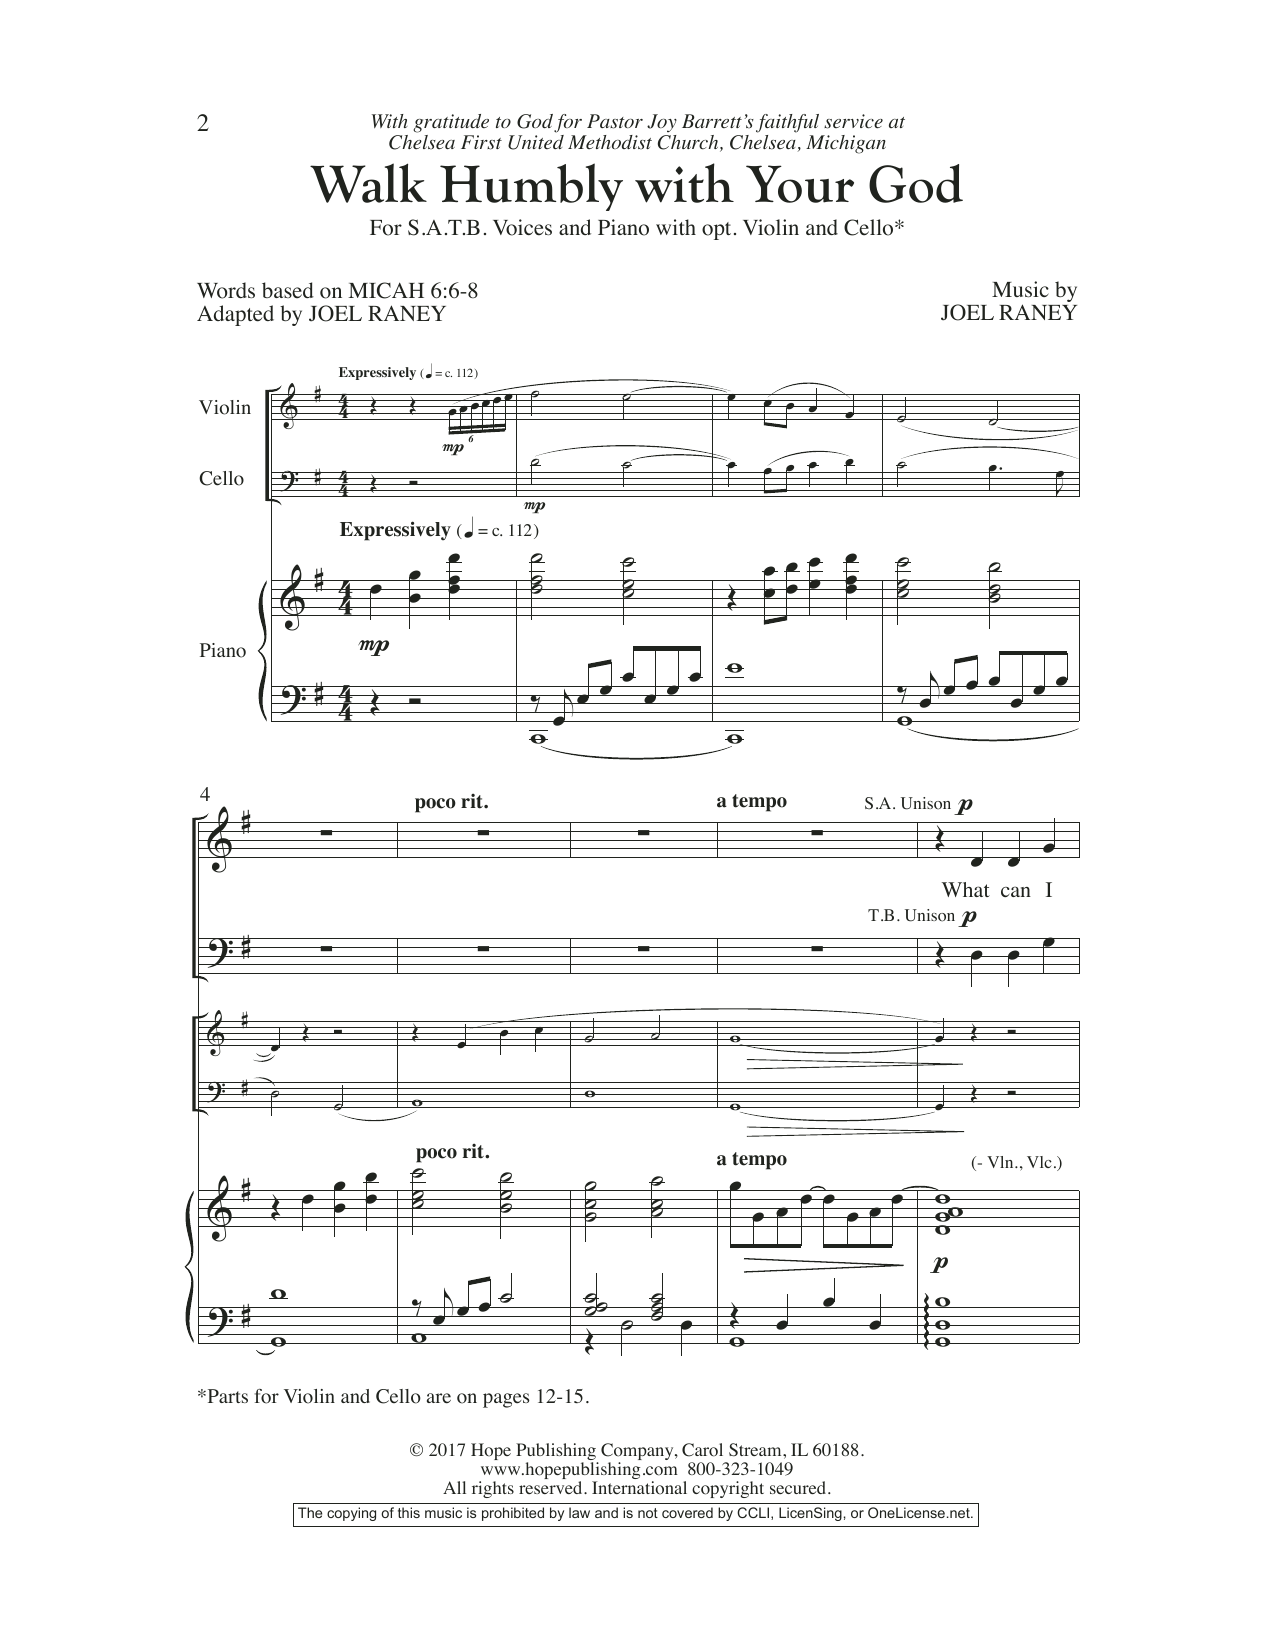 Download Joel Raney Walk Humbly With Your God Sheet Music